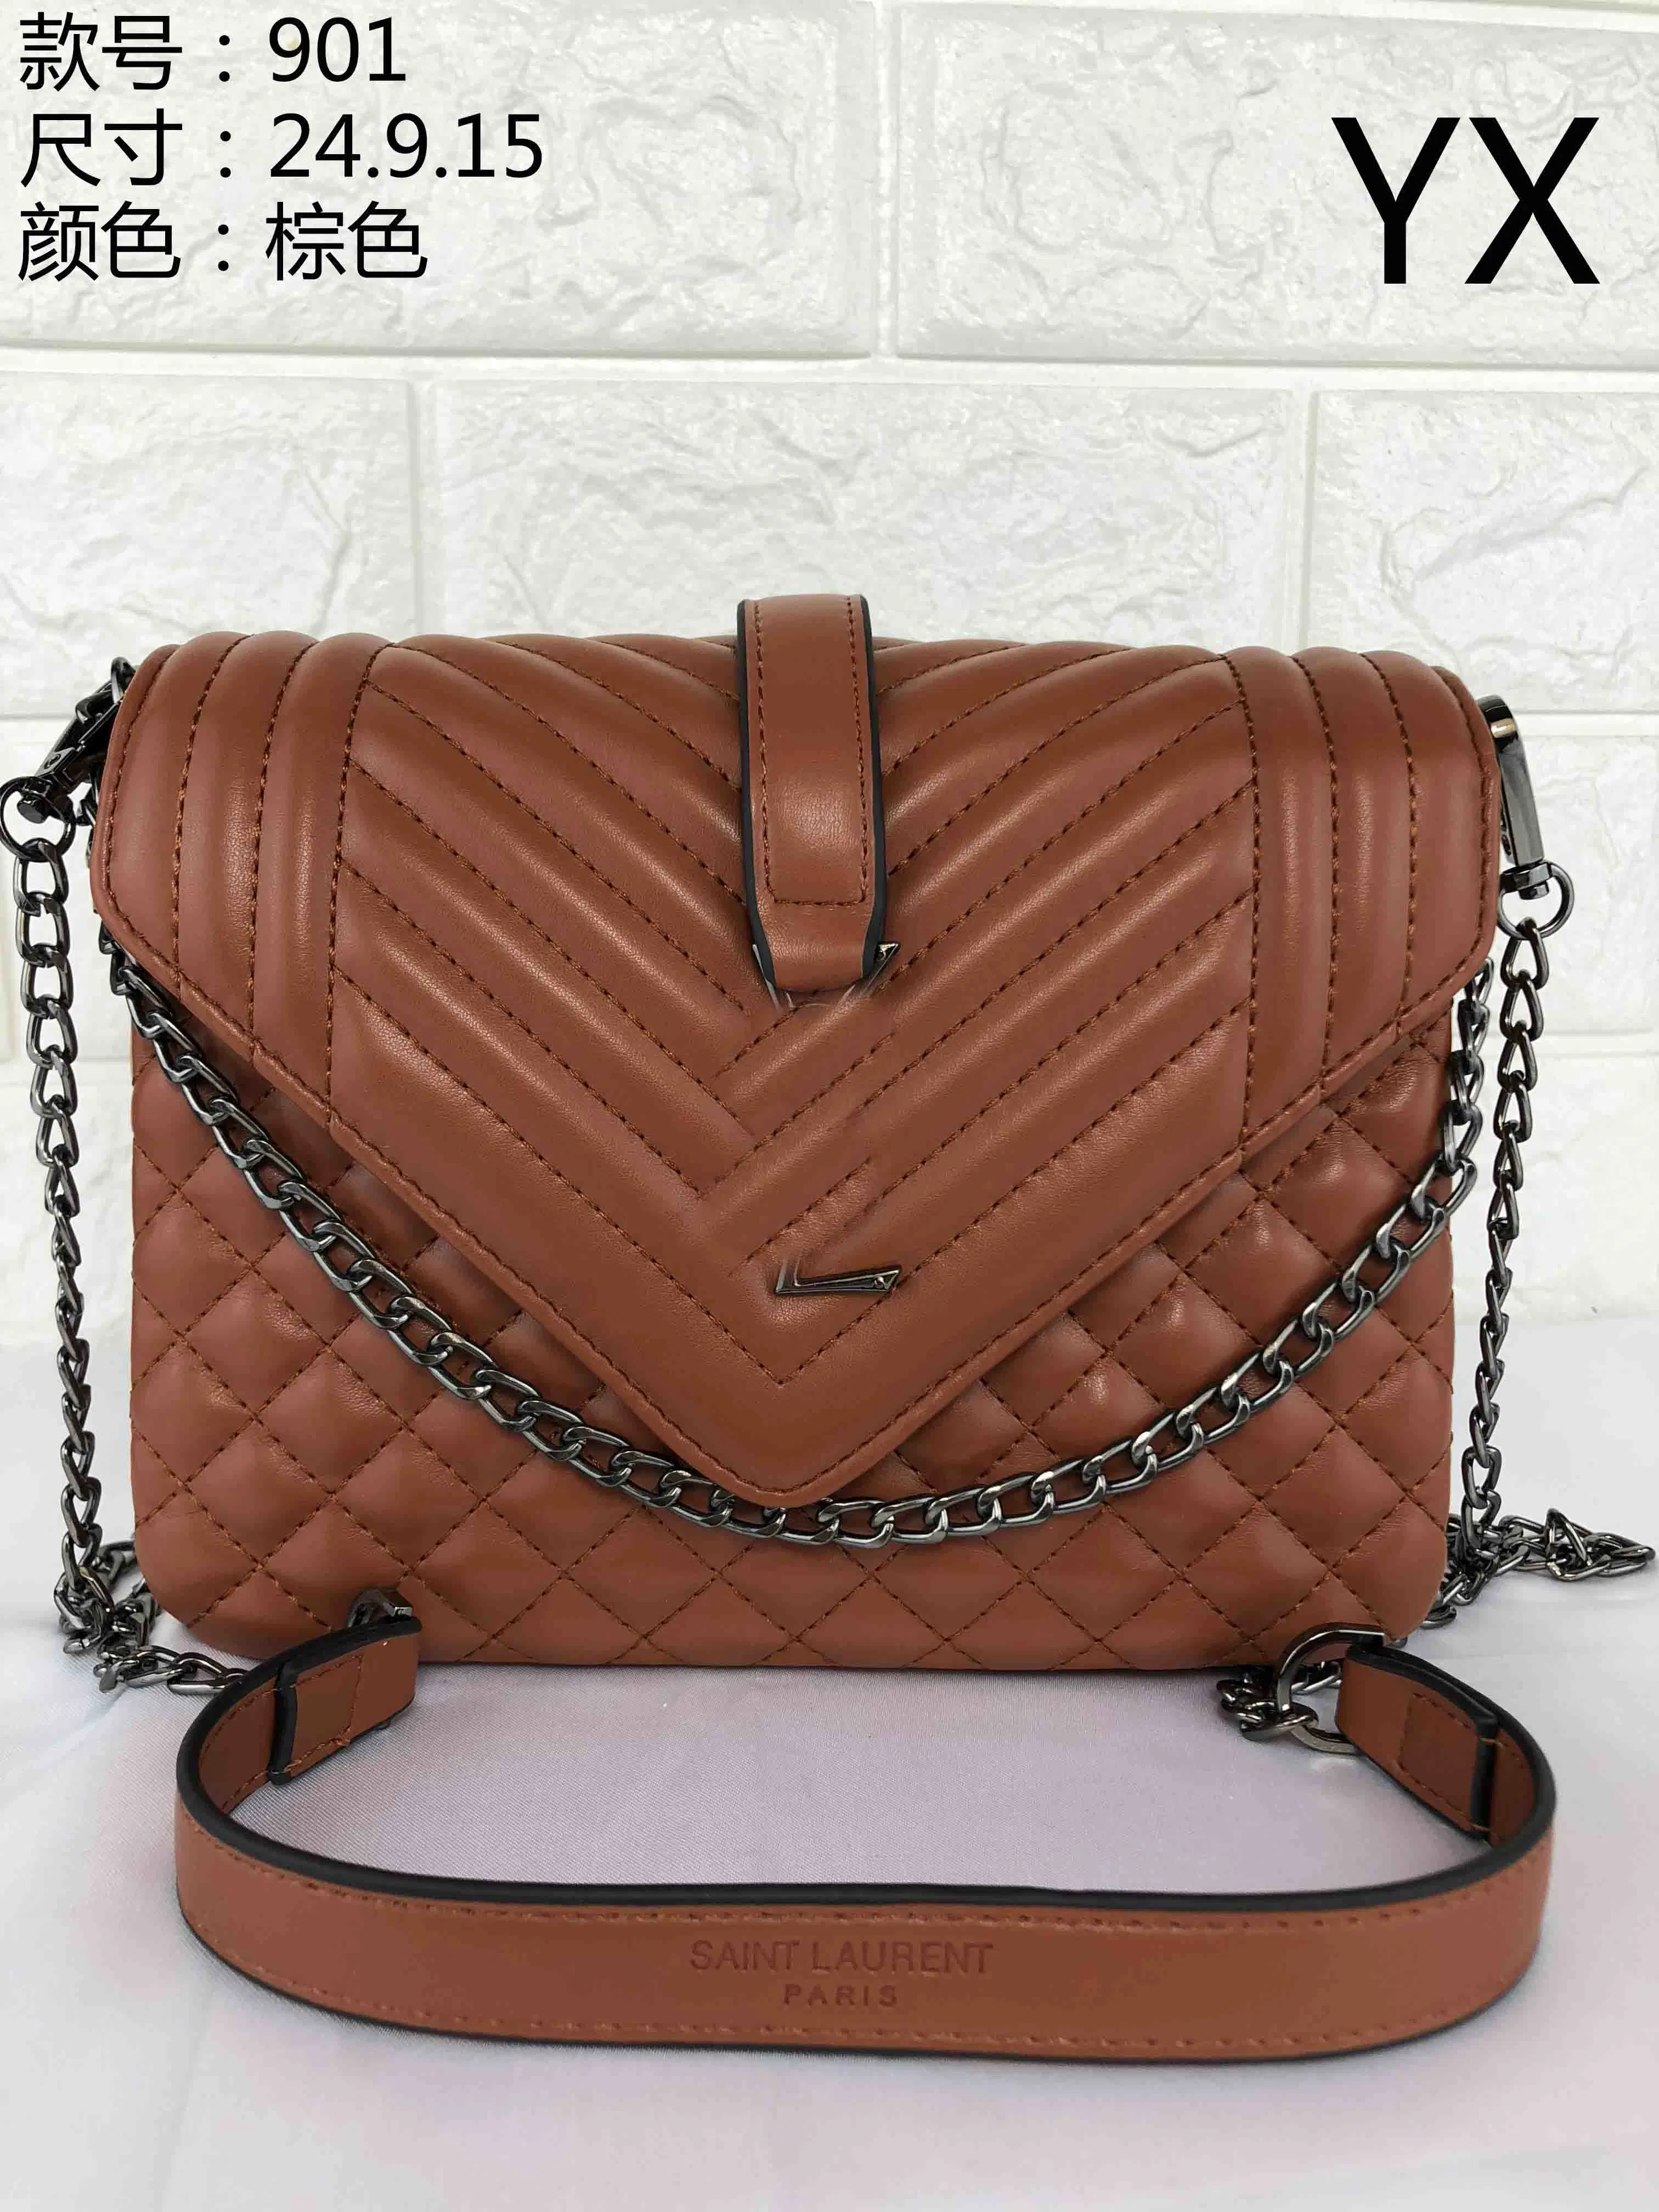 Madame Madame Brand. Copy. Shoulder Bag Chain Wholesale Market. Fashion Chinese Goods Leather Bags. Top Quality. Women's Fashion